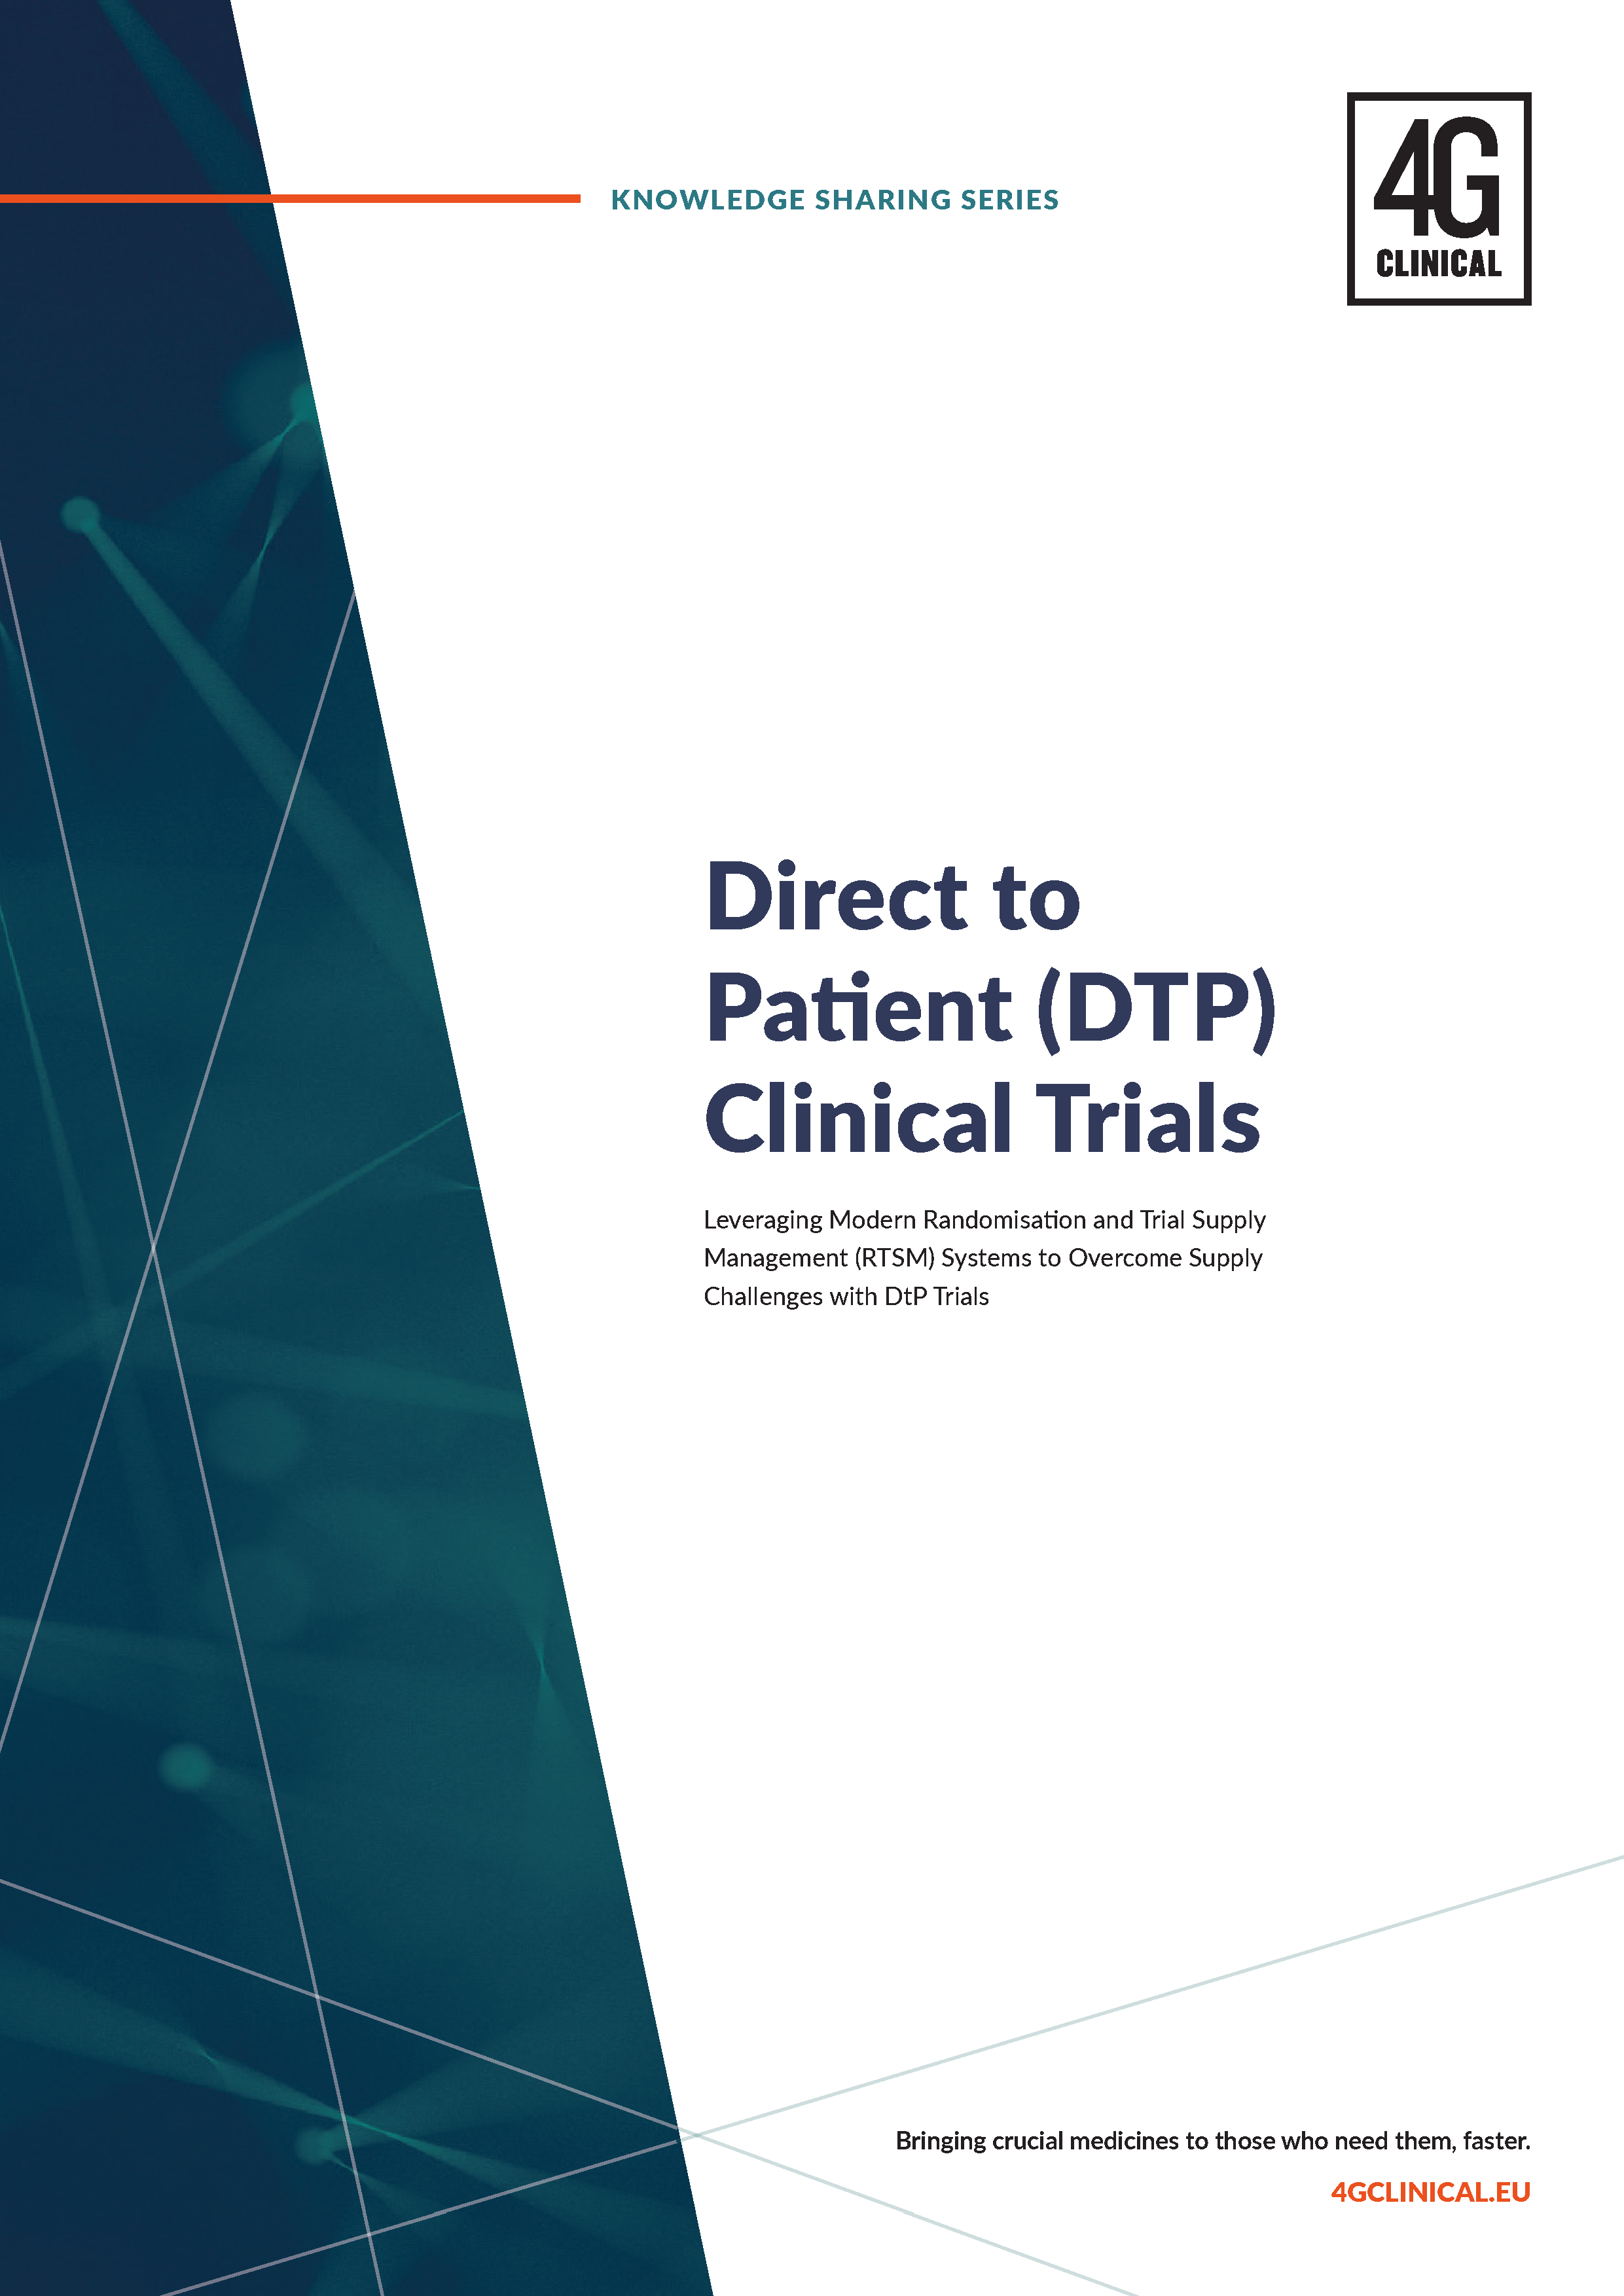 Direct-to-Patient Clinical Trials_GB 1